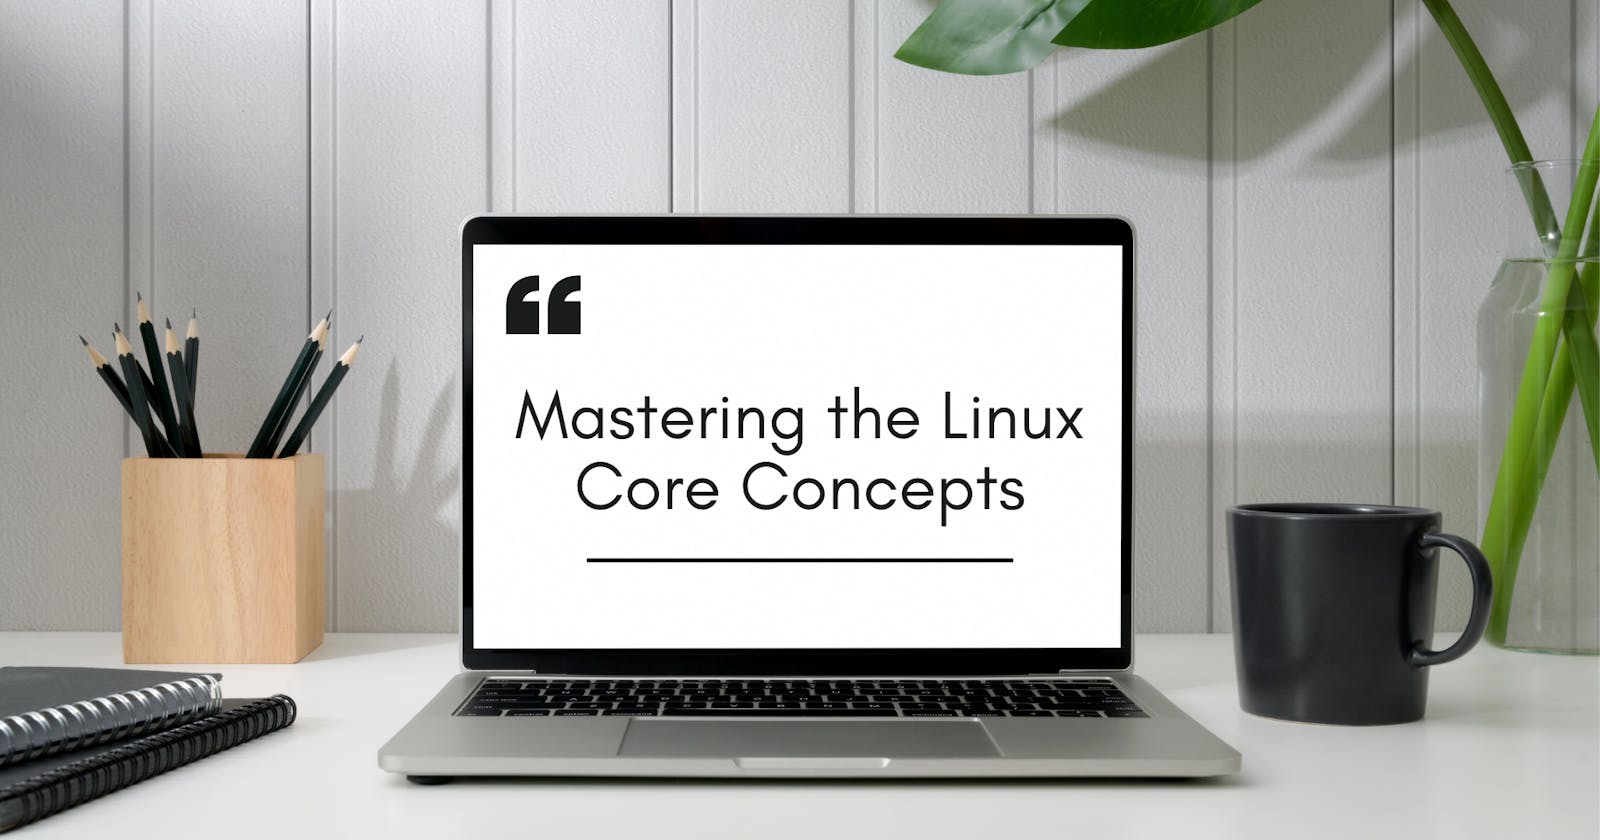 Mastering the Linux Core Concepts